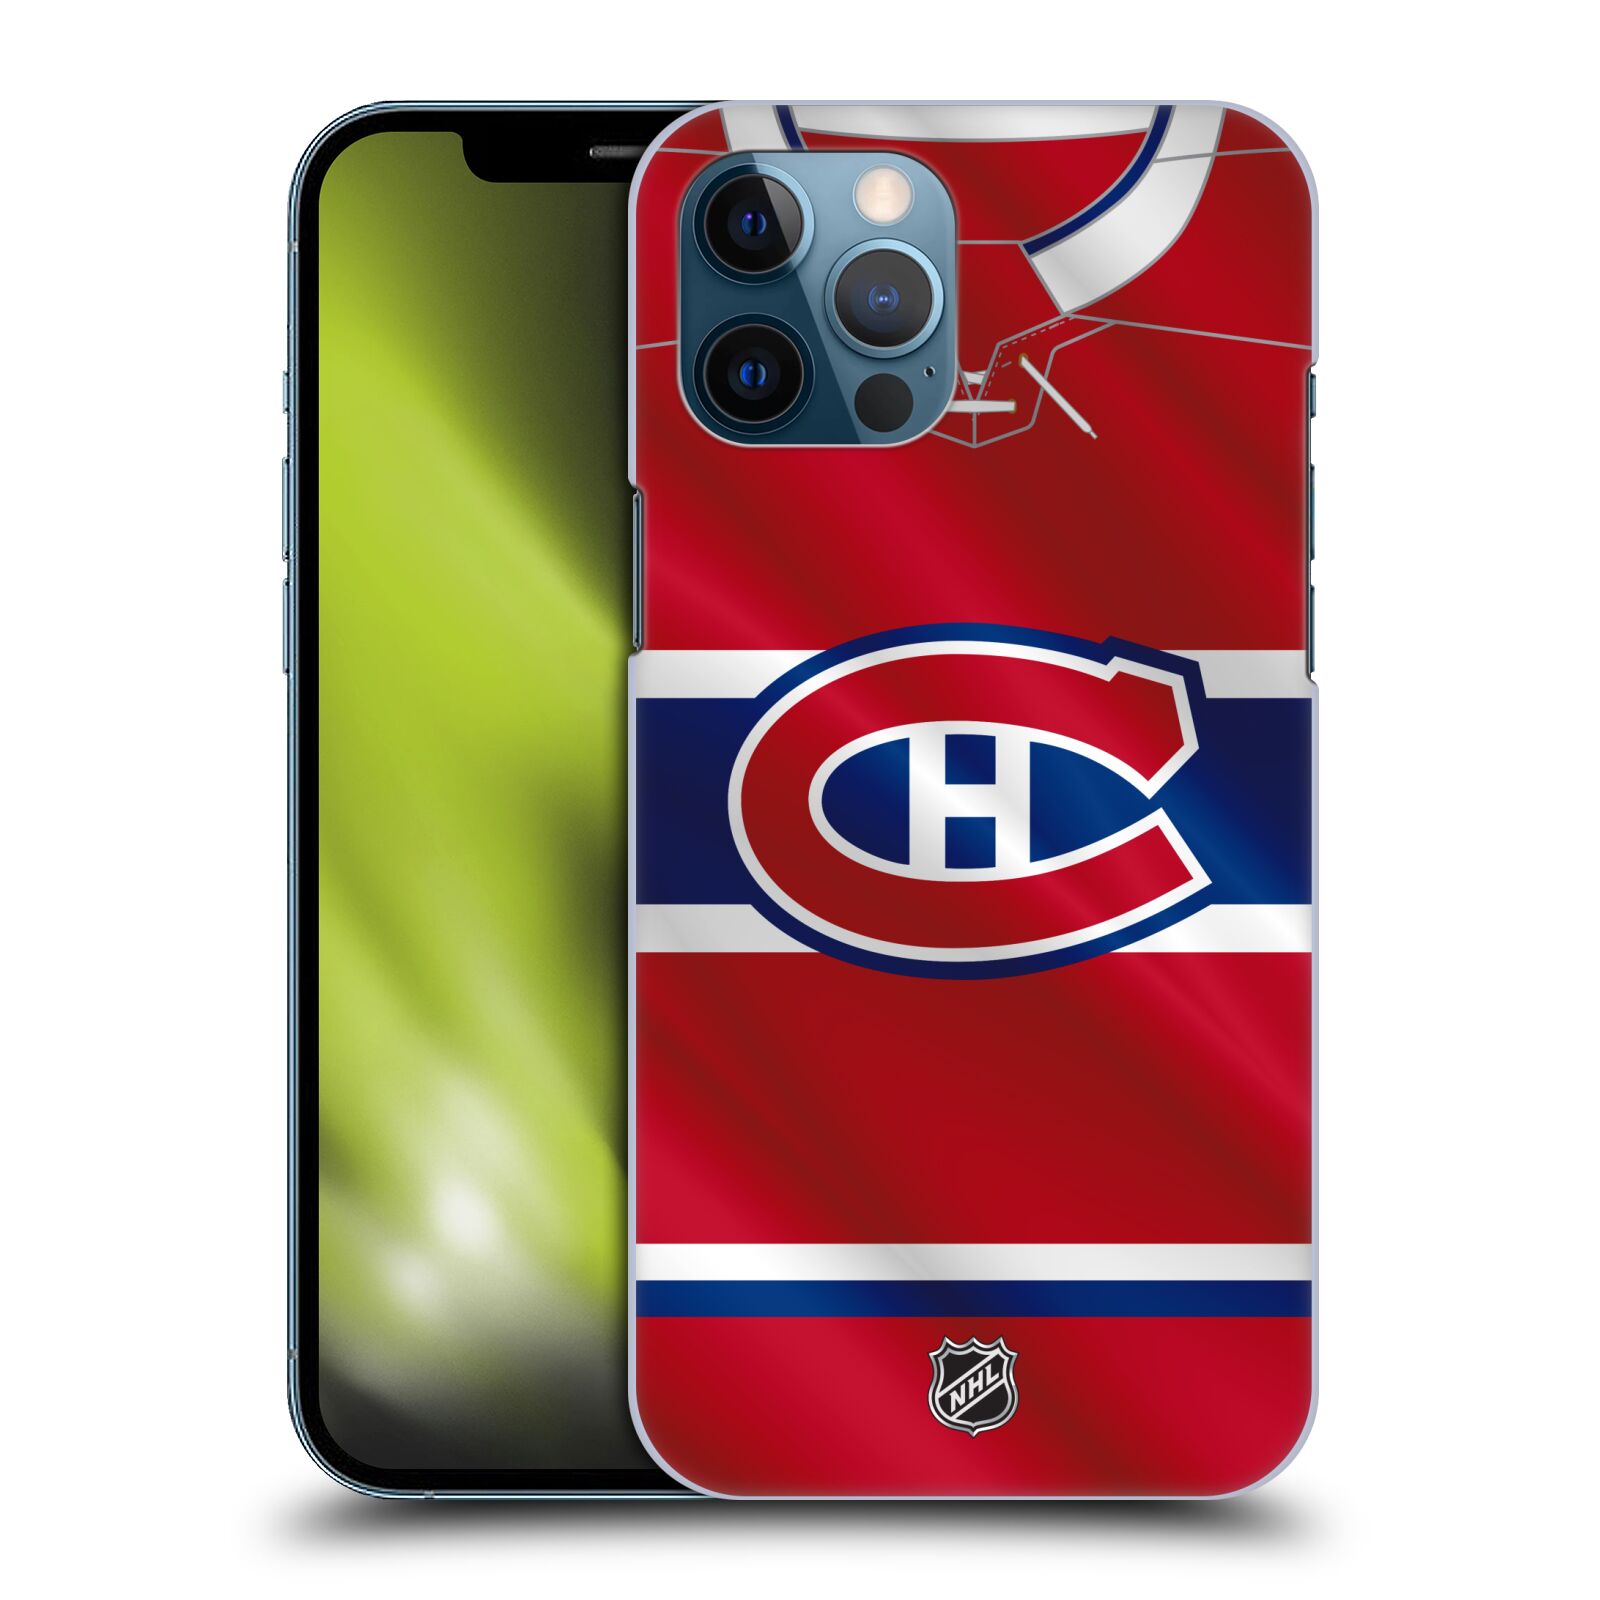 Pouzdro na mobil Apple Iphone 12 PRO MAX - HEAD CASE - Hokej NHL - Montreal Canadiens - Dres